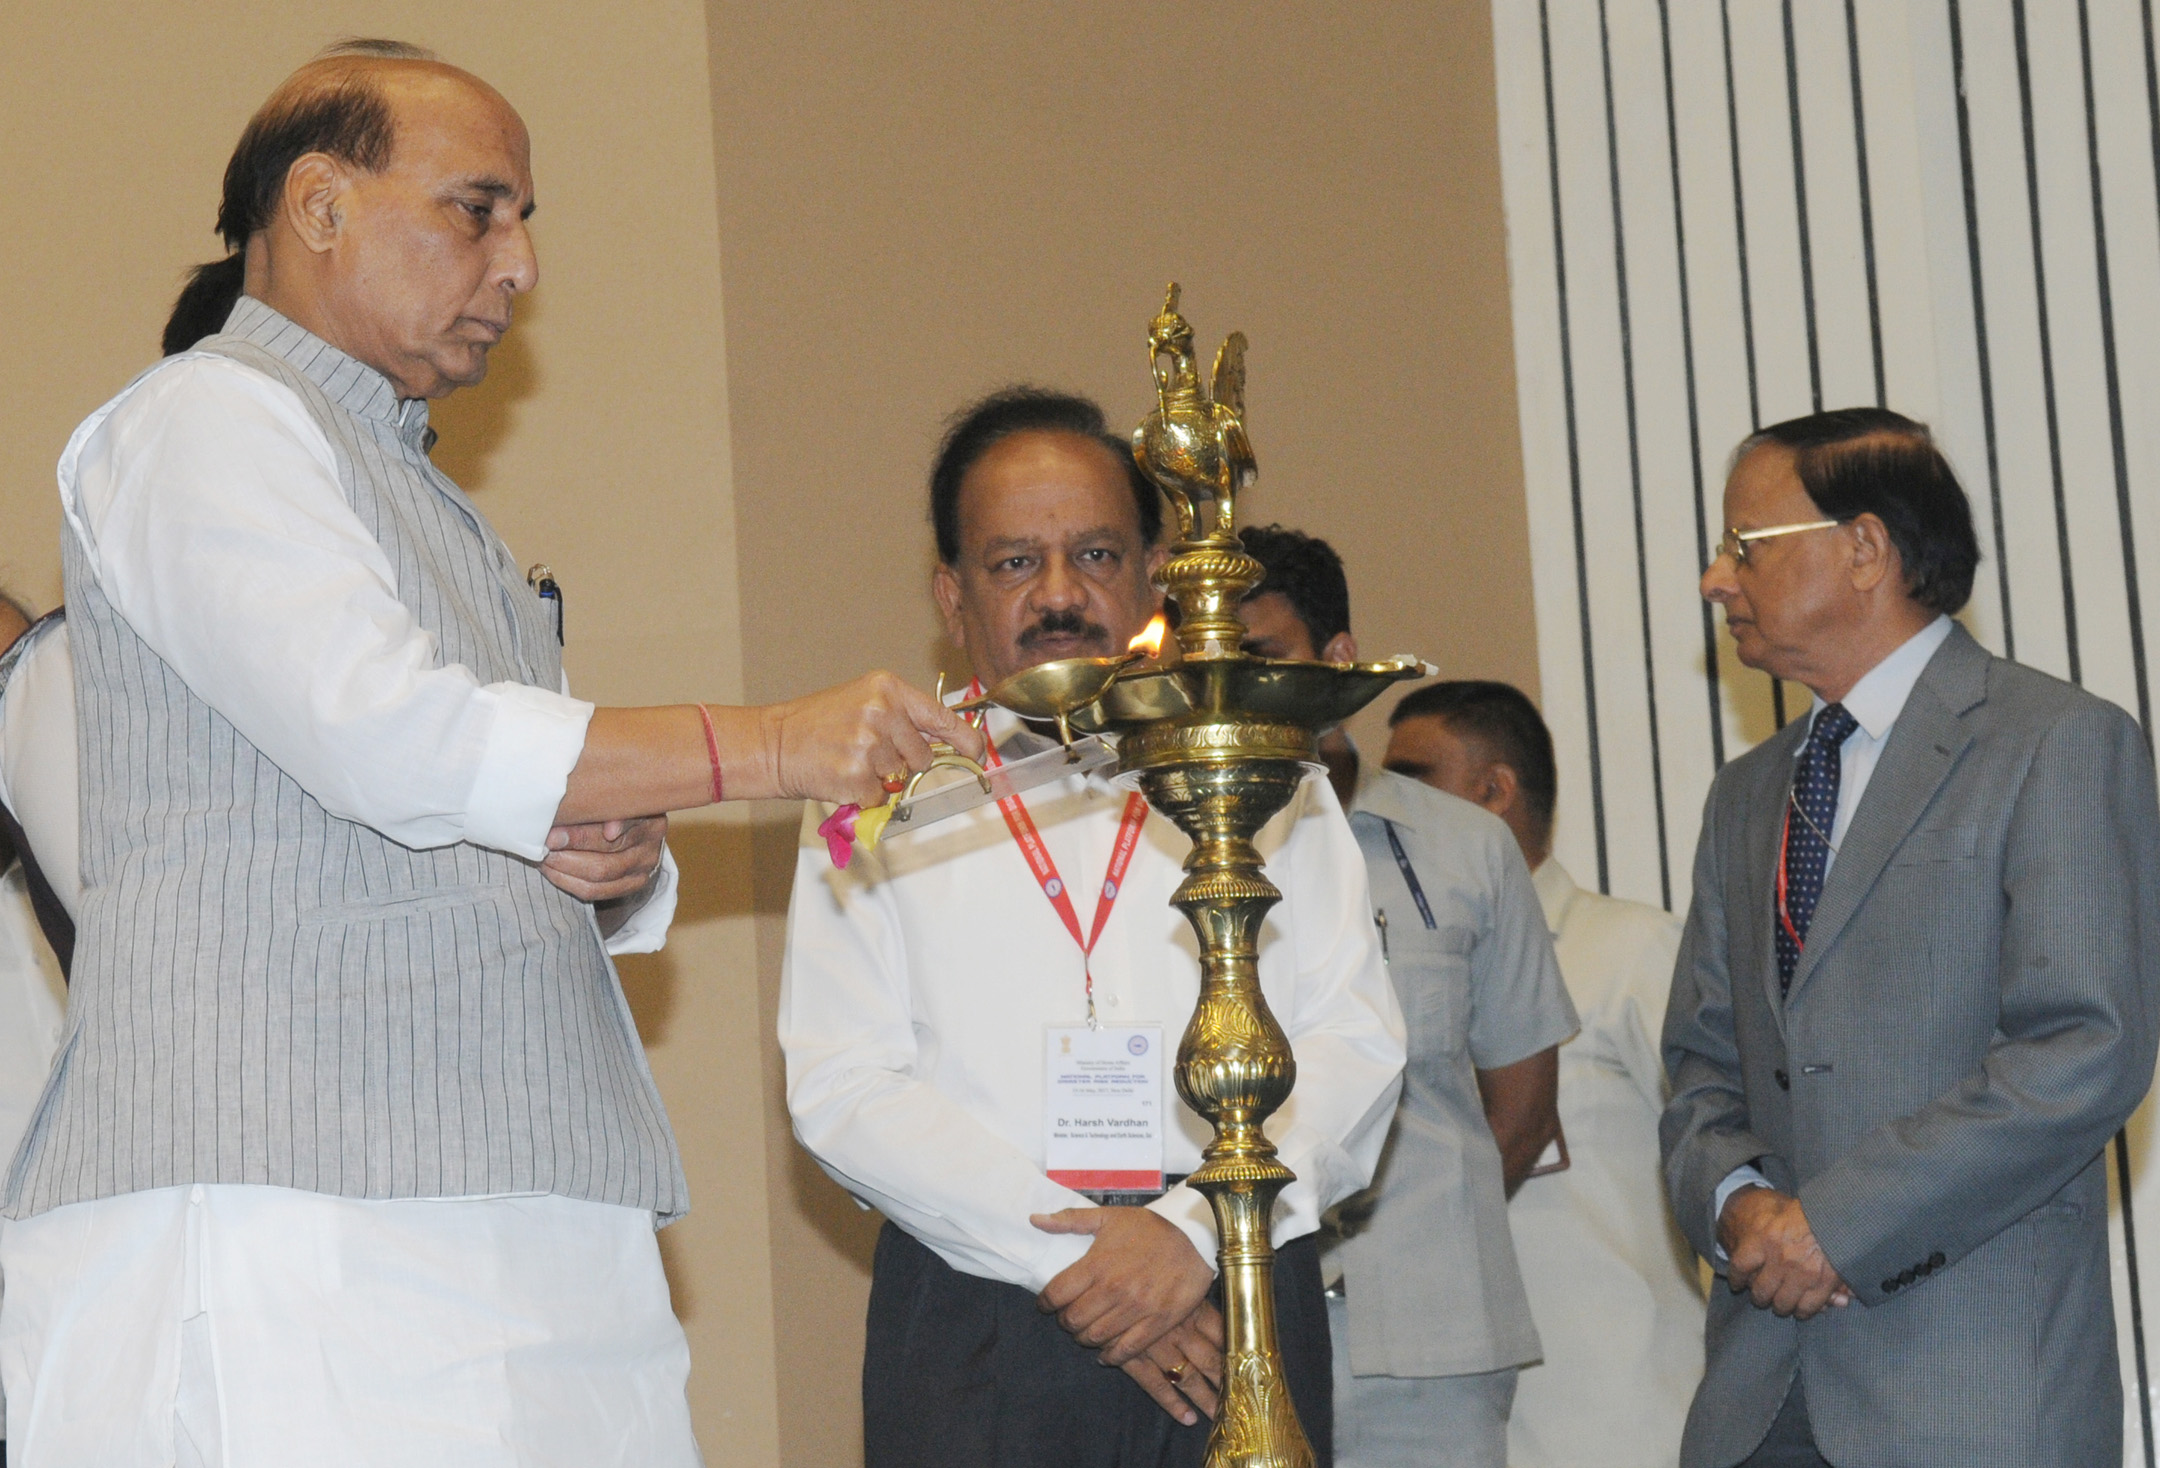 The Union Home Minister, Shri Rajnath Singh lighting the lamp to inaugurate the second meeting of the National Platform for Disaster Risk Reduction (NPDRR), in New Delhi on May 15, 2017. 	The Union Minister for Science & Technology and Earth Sciences, Dr. Harsh Vardhan and the Additional Principal Secretary to the Prime Minister, Dr. P.K. Mishra are also seen.